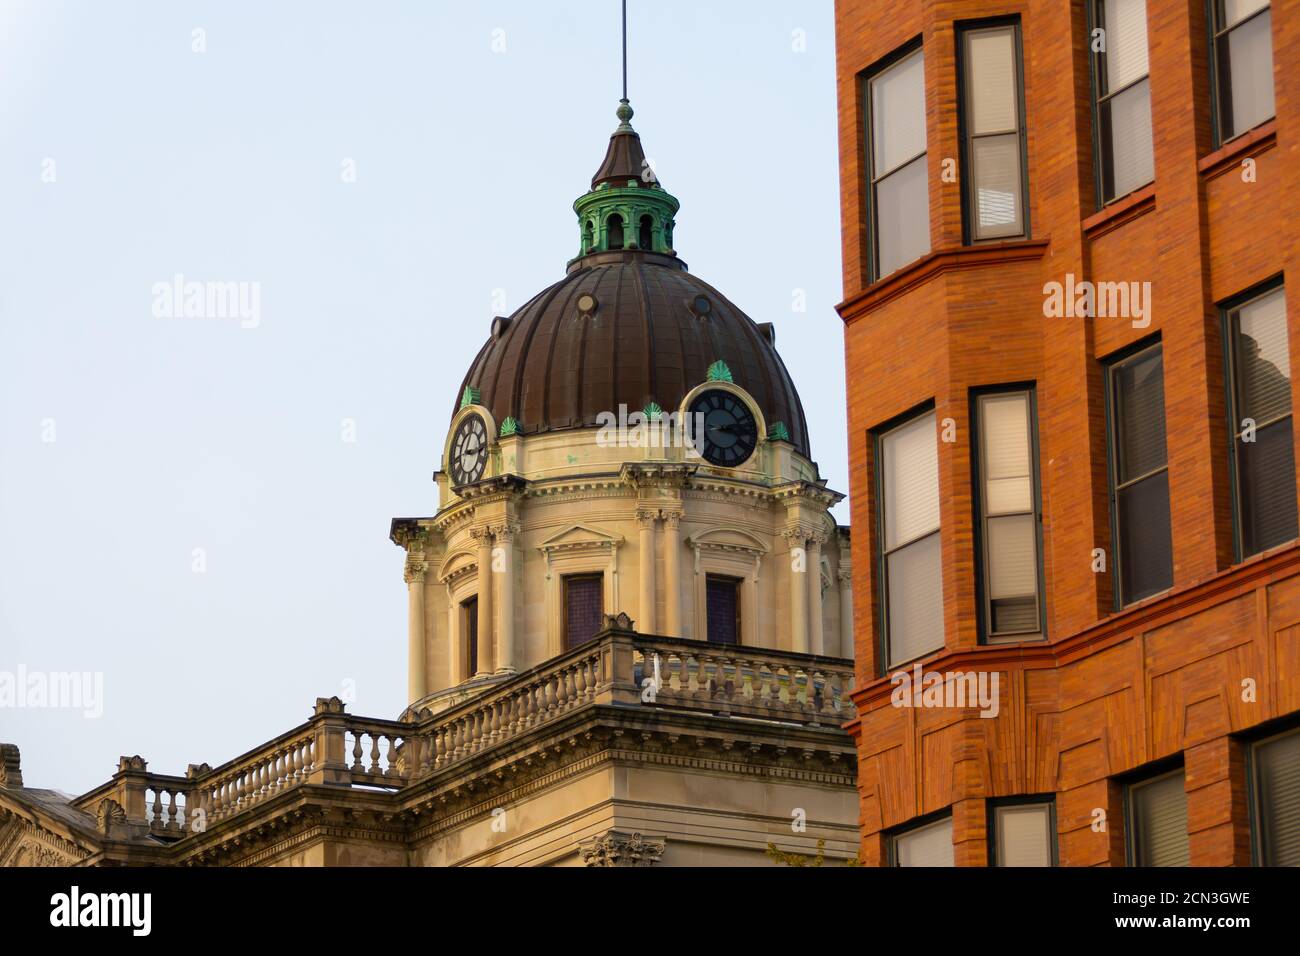 The Old Mclean County Courthouse as the sun rises in the city.  Bloomington, Illinois, USA Stock Photo